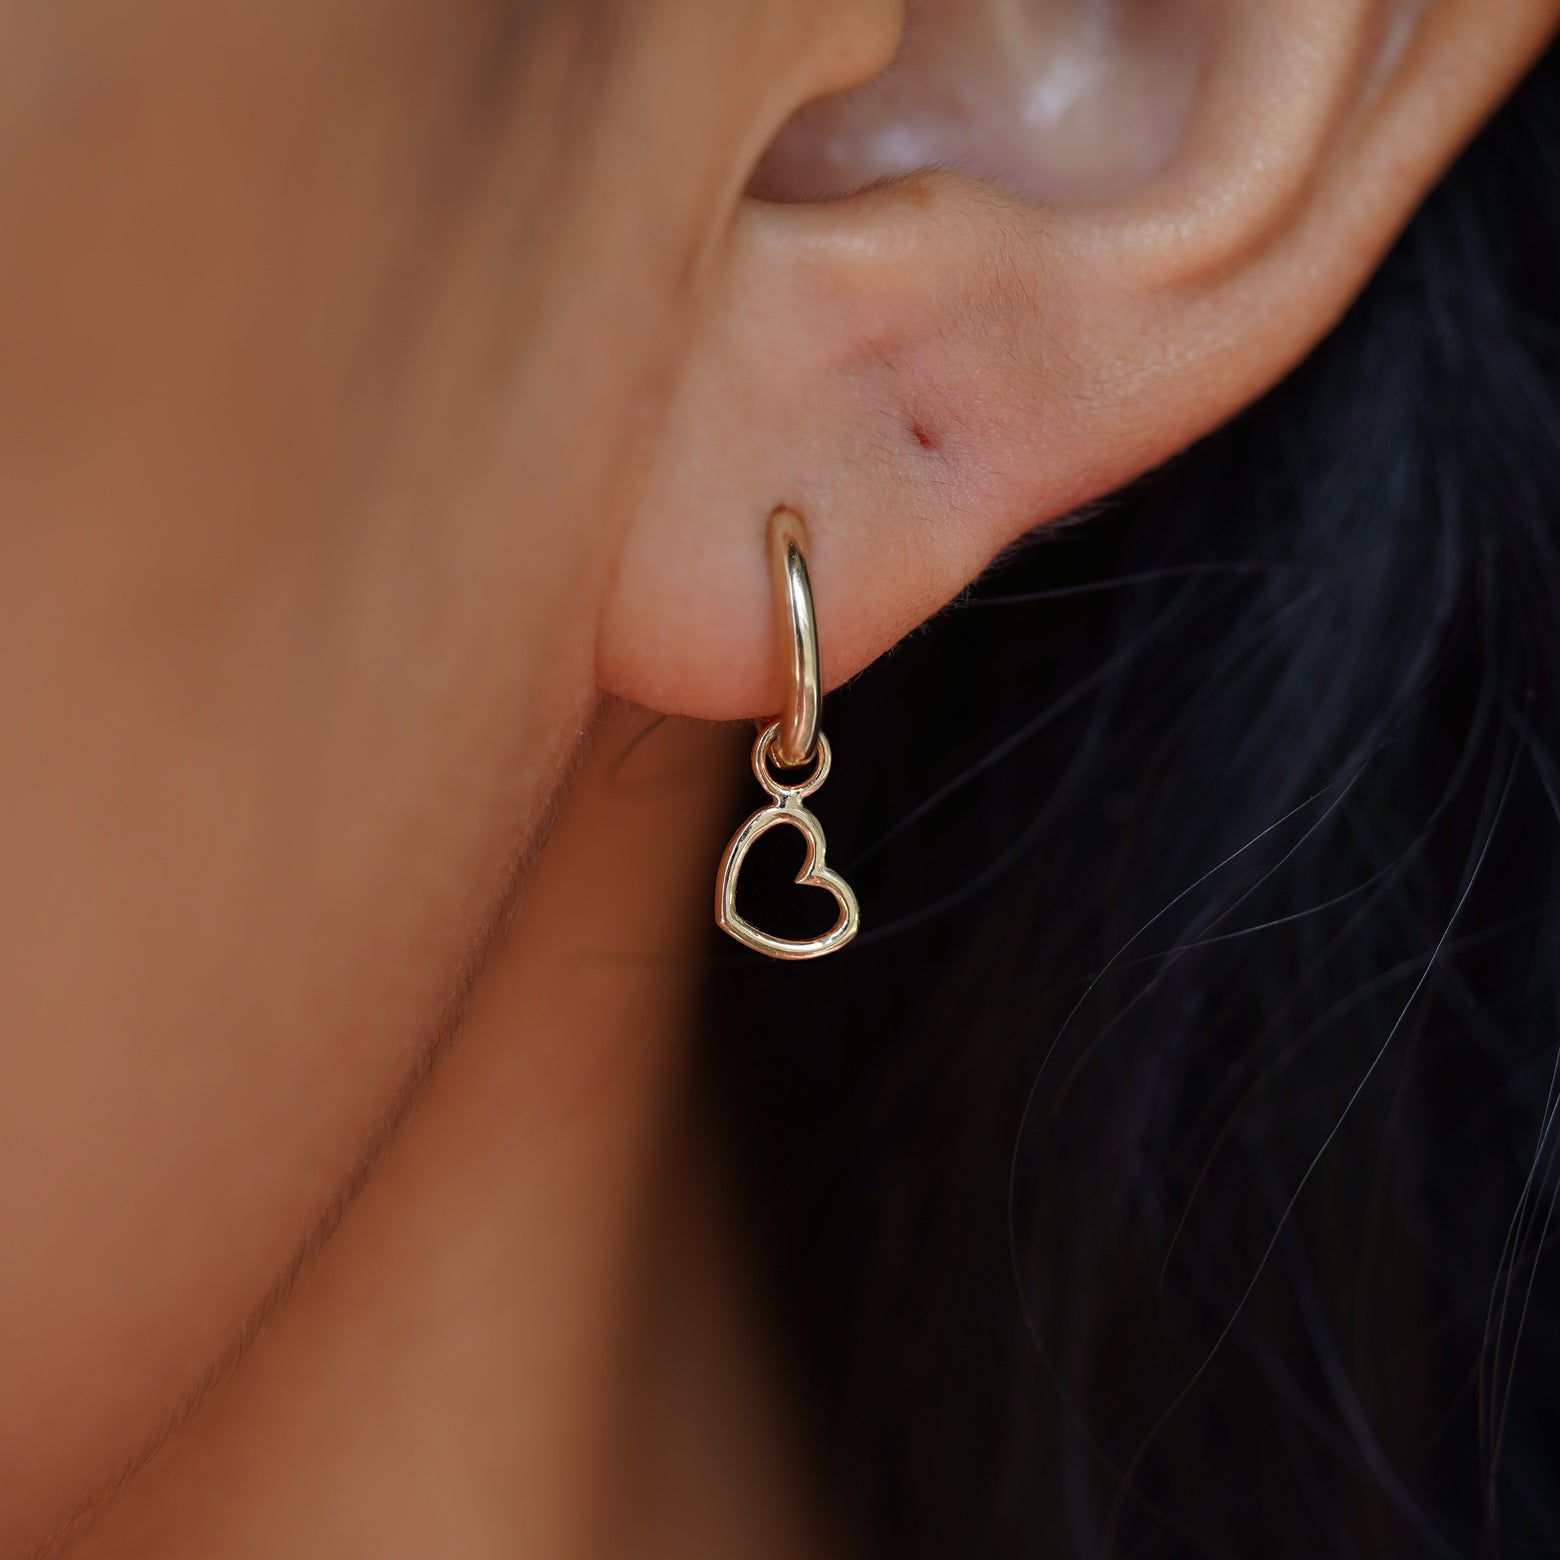 Close up view of a model's ear wearing a yellow gold Heart Charm on a Curvy Huggie Hoop